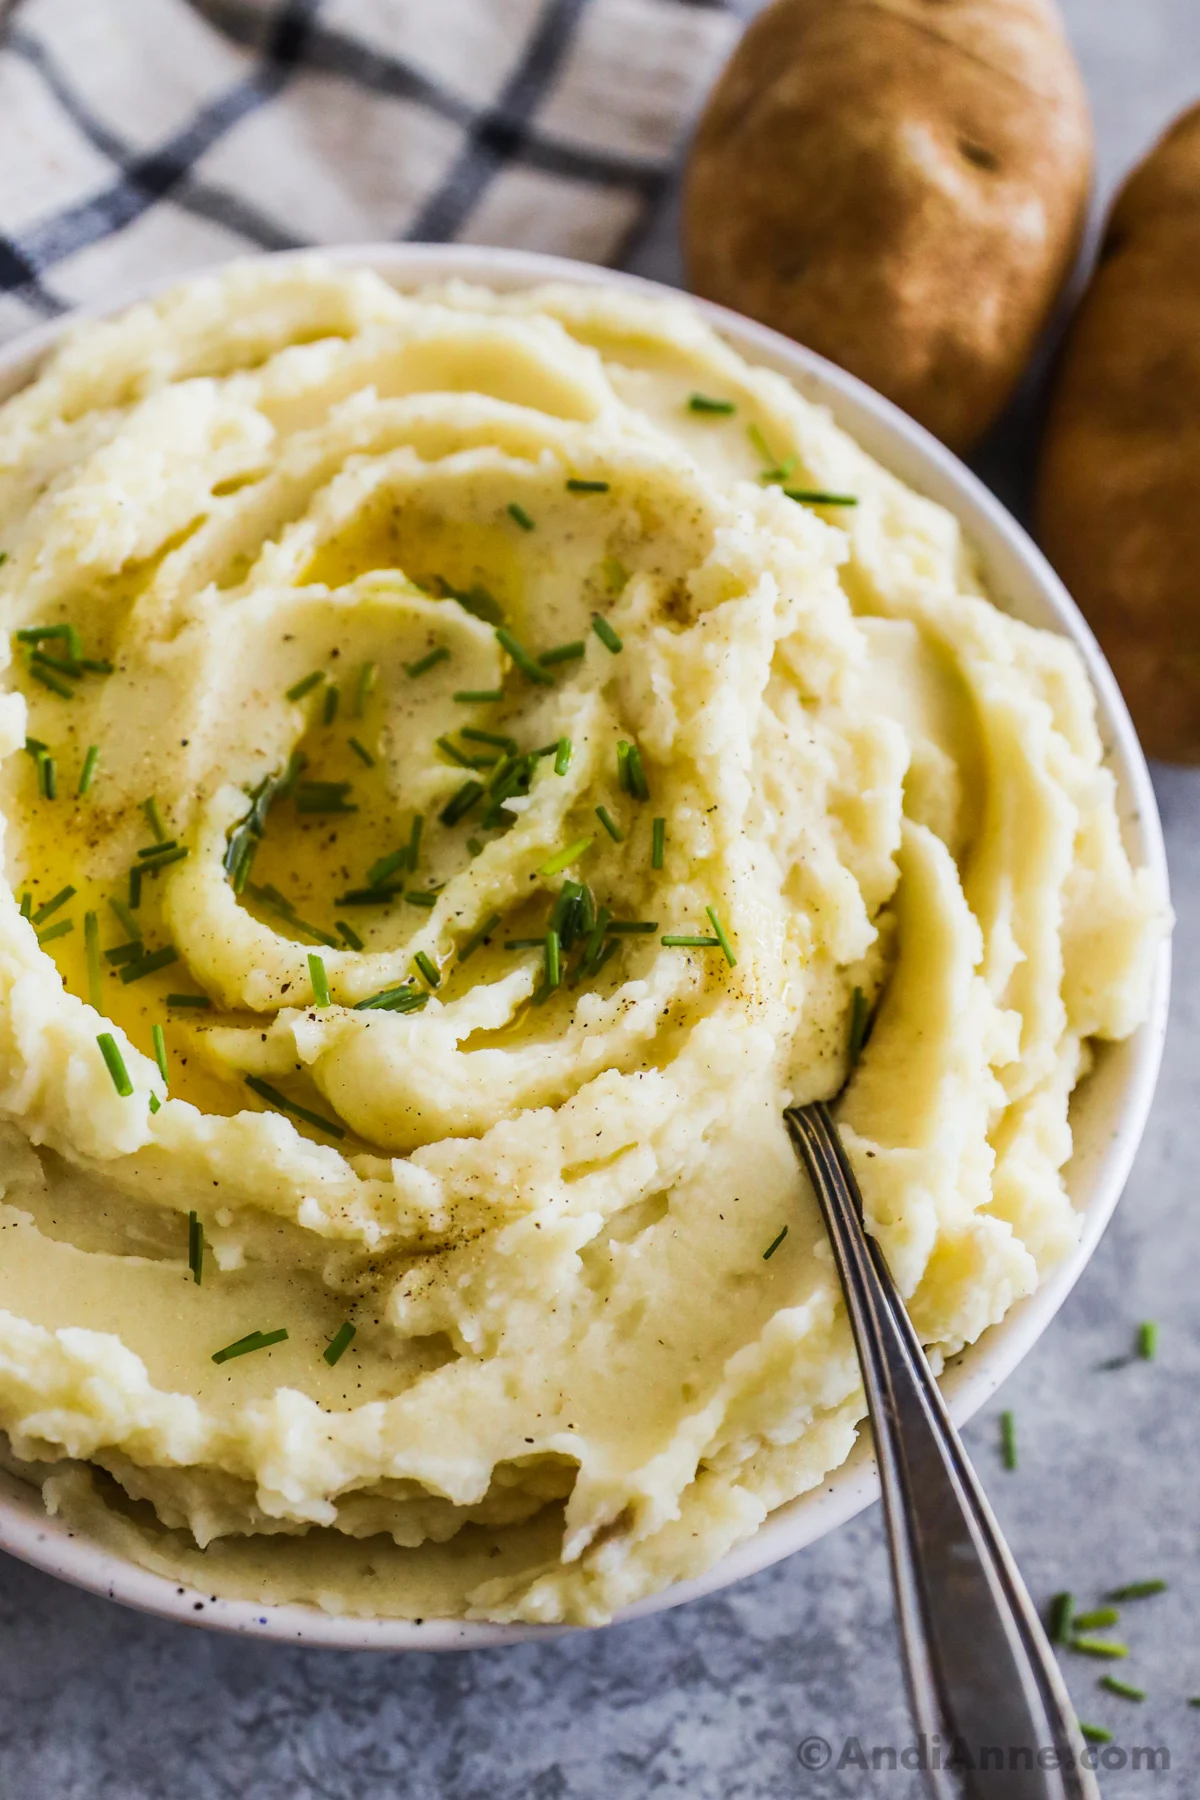 Close up of mashed potatoes with chives on top and a spoon. Russet potatoes in the background.